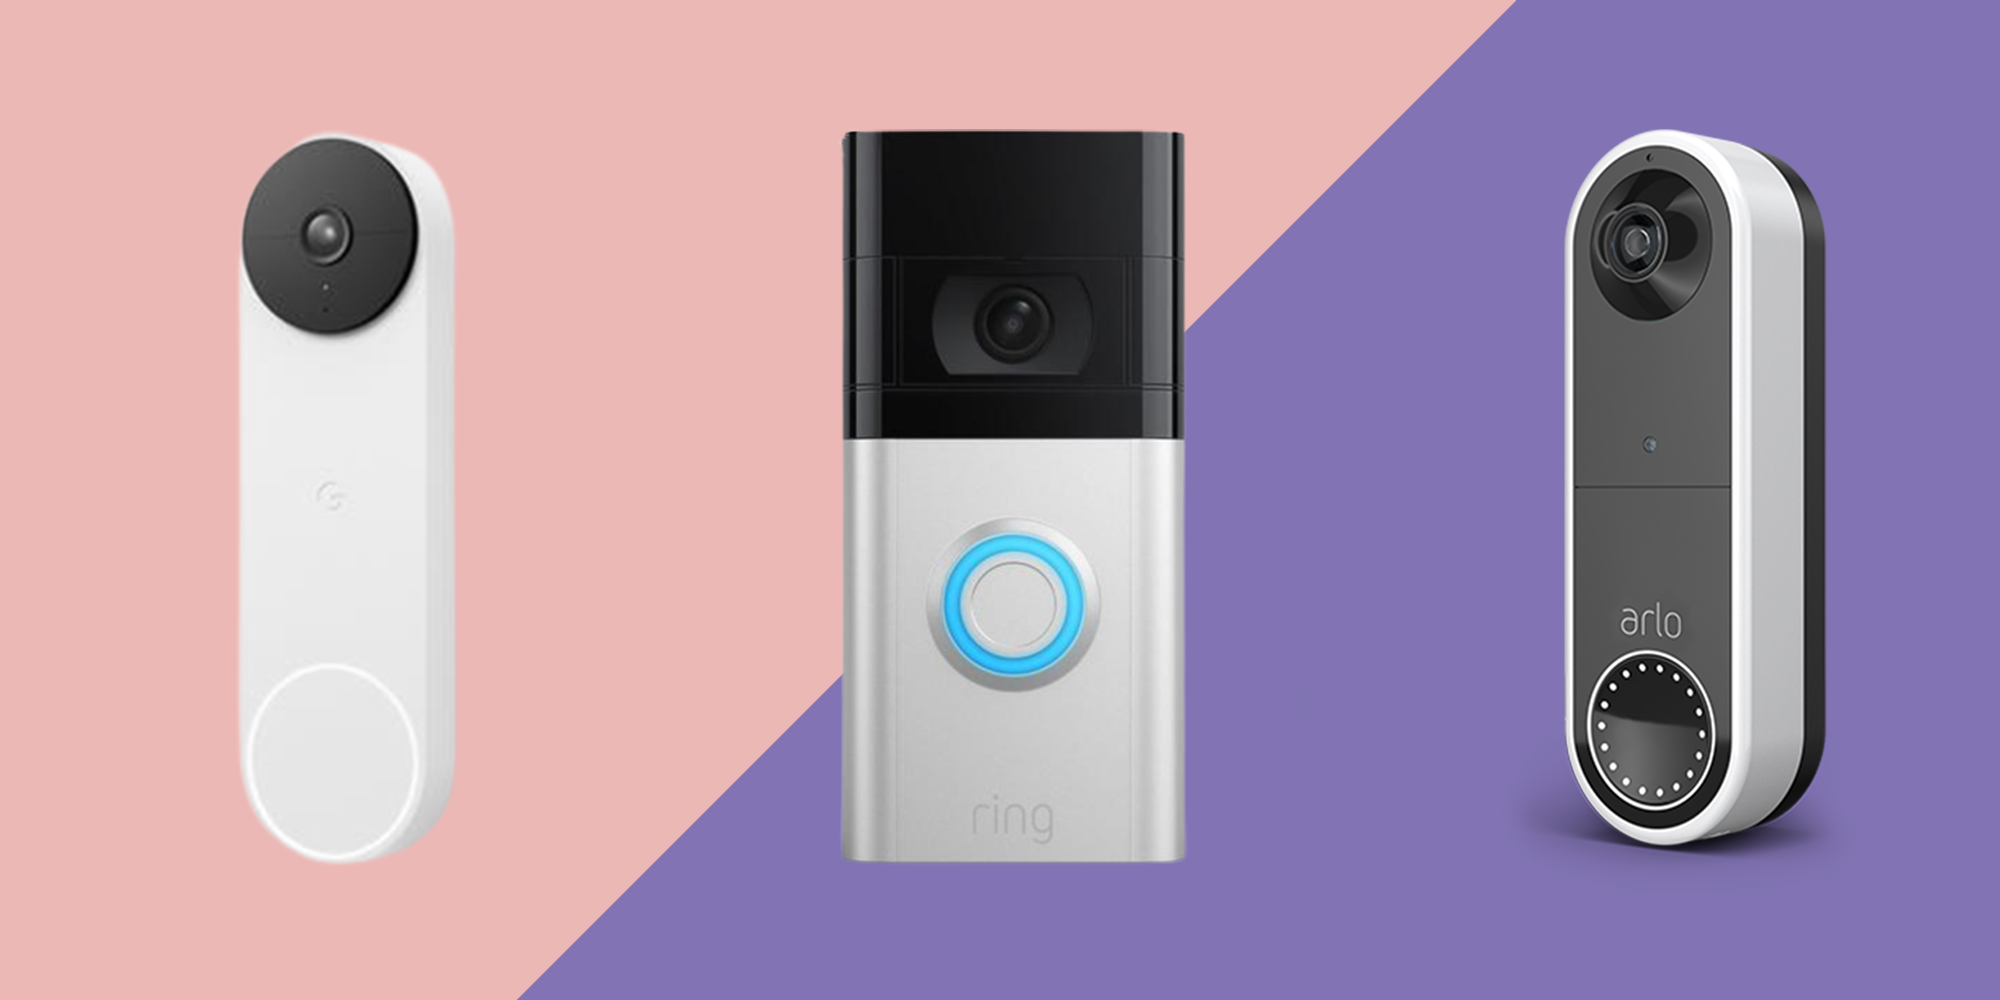 eufy Security, Video Doorbell S220 (Battery-Powered) Kit, Security Camera -  2K Resolution, 180-Day Battery Life, Encrypted Local Storage, No Monthly